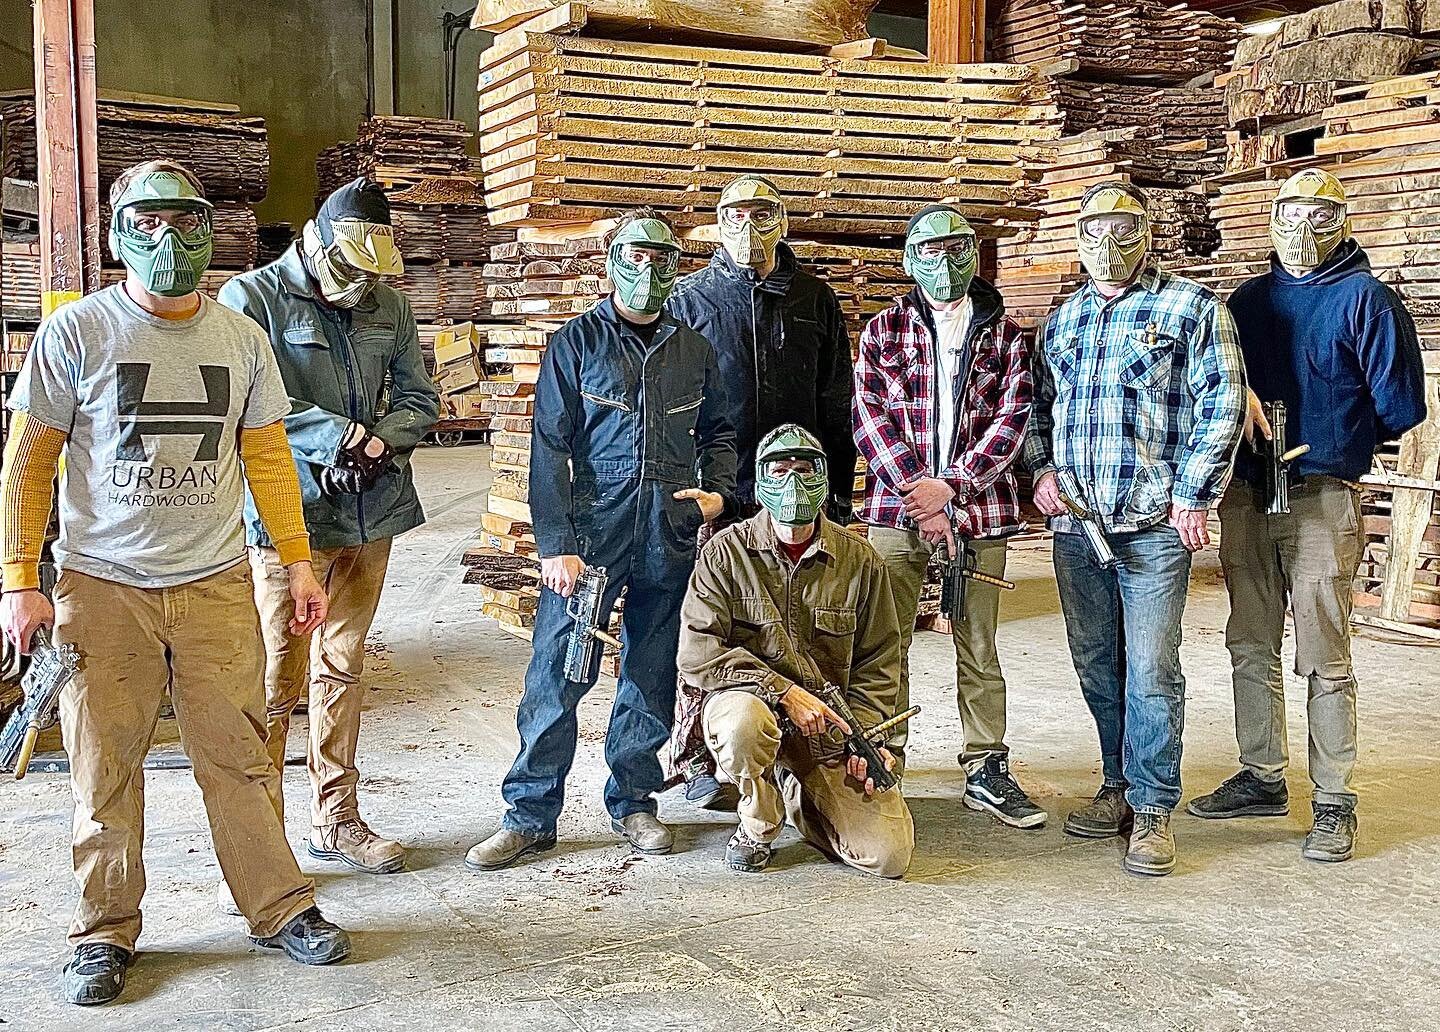 Suit up! It&rsquo;s time for a good ol&rsquo; fashion paintball game with the Urban Hardwoods crew! 👔🎨🔫
.
.
.
@urbanlumberco 
.
.
#urbanhardwoods #woodworking #reclaimedwood #custom #furniture #paintball #warriors #seattle